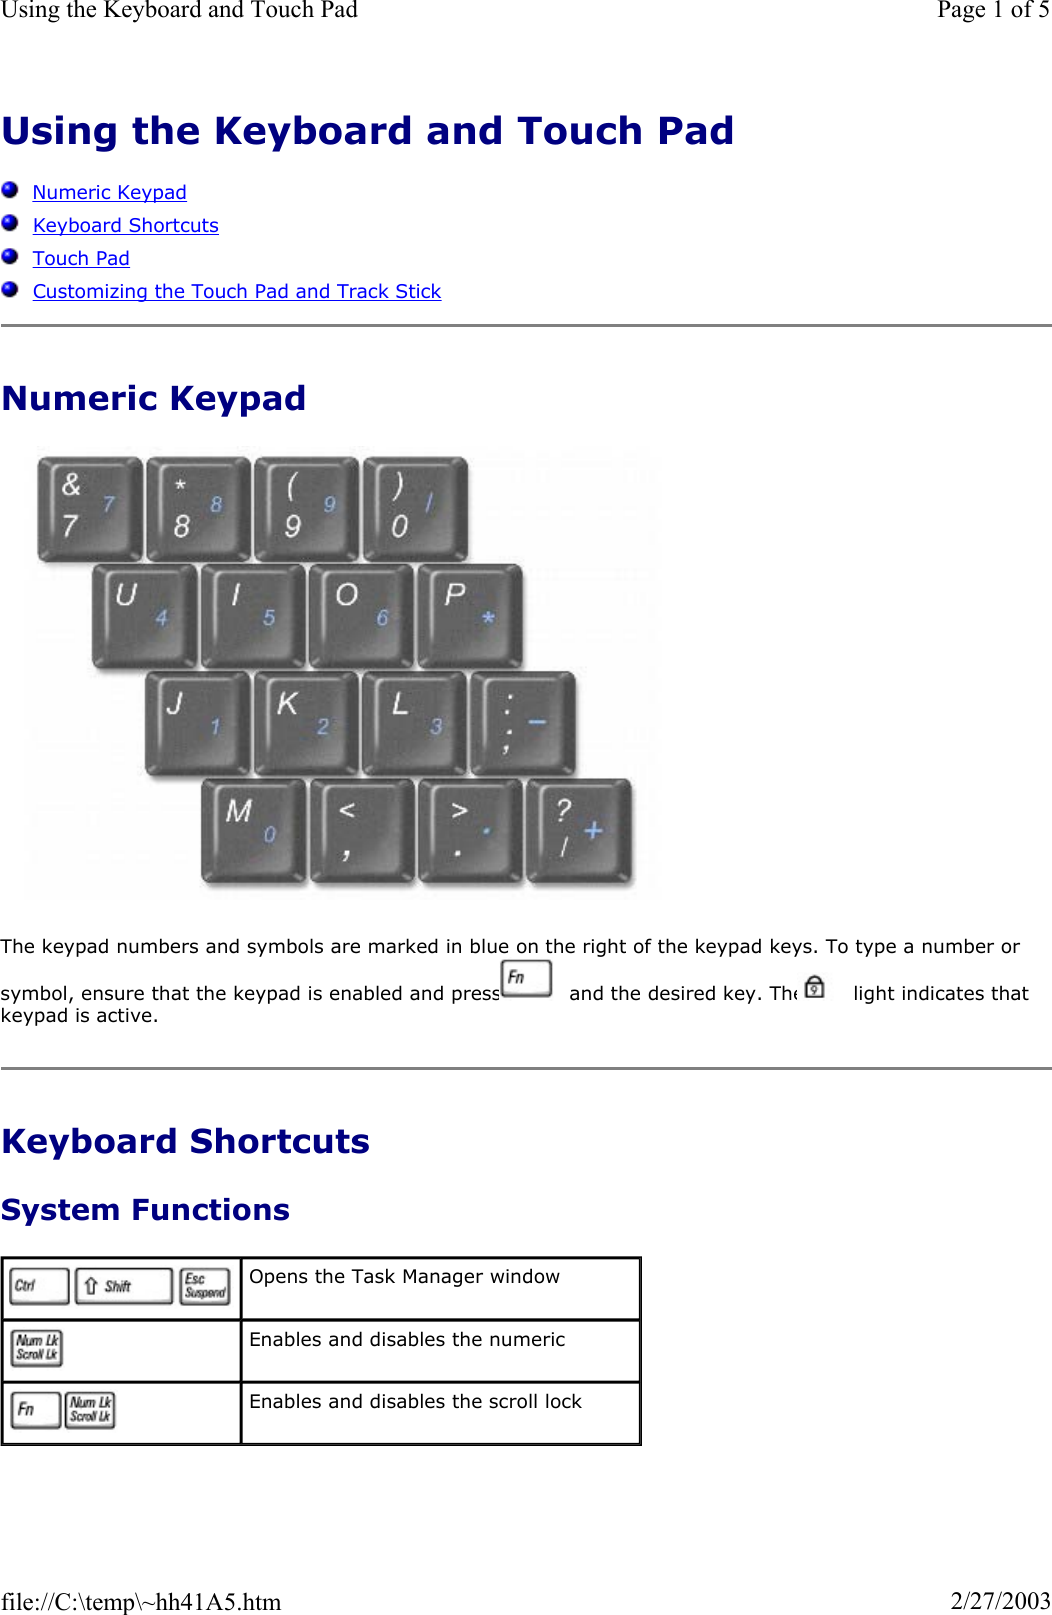 Using the Keyboard and Touch PadNumeric KeypadKeyboard ShortcutsTouch PadCustomizing the Touch Pad and Track StickNumeric Keypad The keypad numbers and symbols are marked in blue on the right of the keypad keys. To type a number or symbol, ensure that the keypad is enabled and press   and the desired key. The   light indicates that keypad is active. Keyboard Shortcuts System Functions Opens the Task Manager window Enables and disables the numeric Enables and disables the scroll lock Page 1 of 5Using the Keyboard and Touch Pad2/27/2003file://C:\temp\~hh41A5.htm